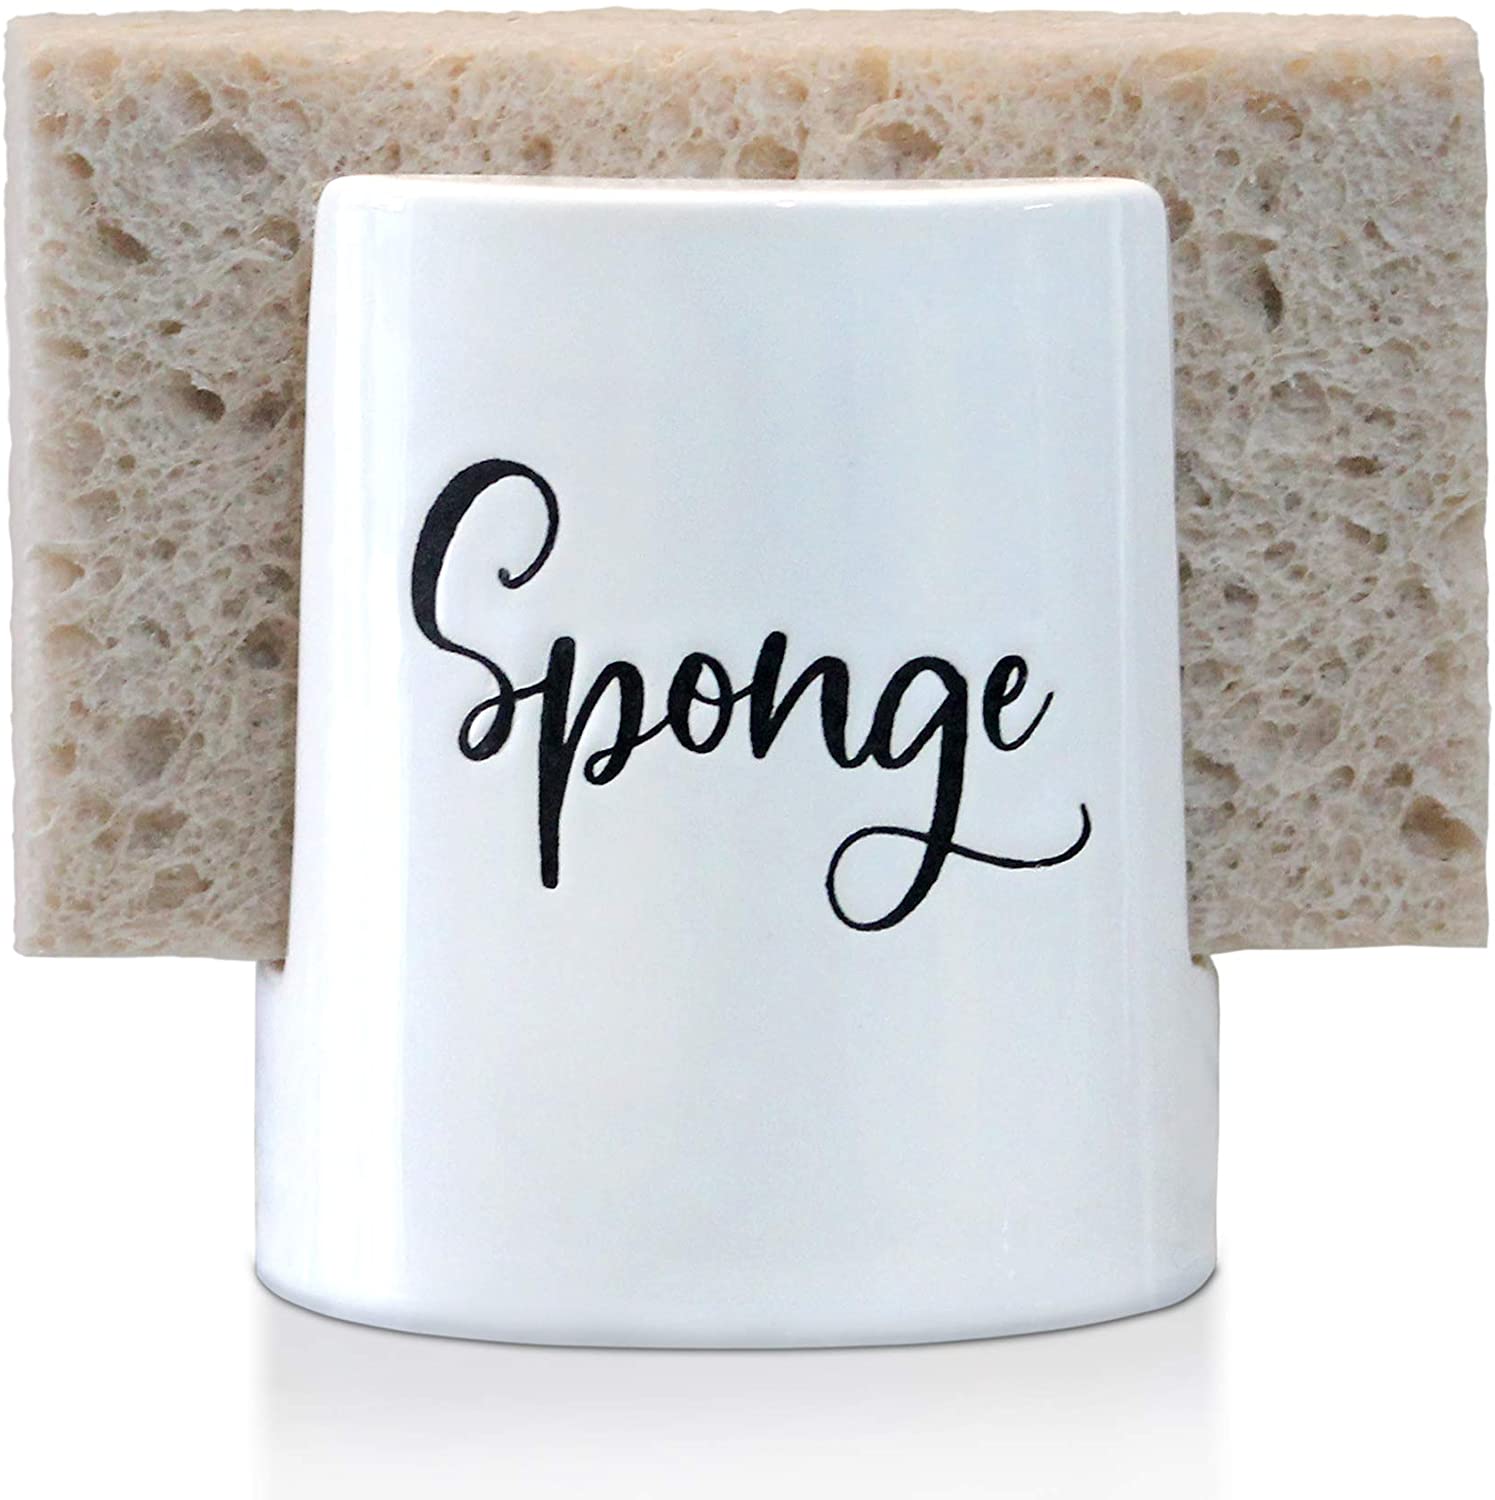 white ceramic sponge holder with the text sponge on the front